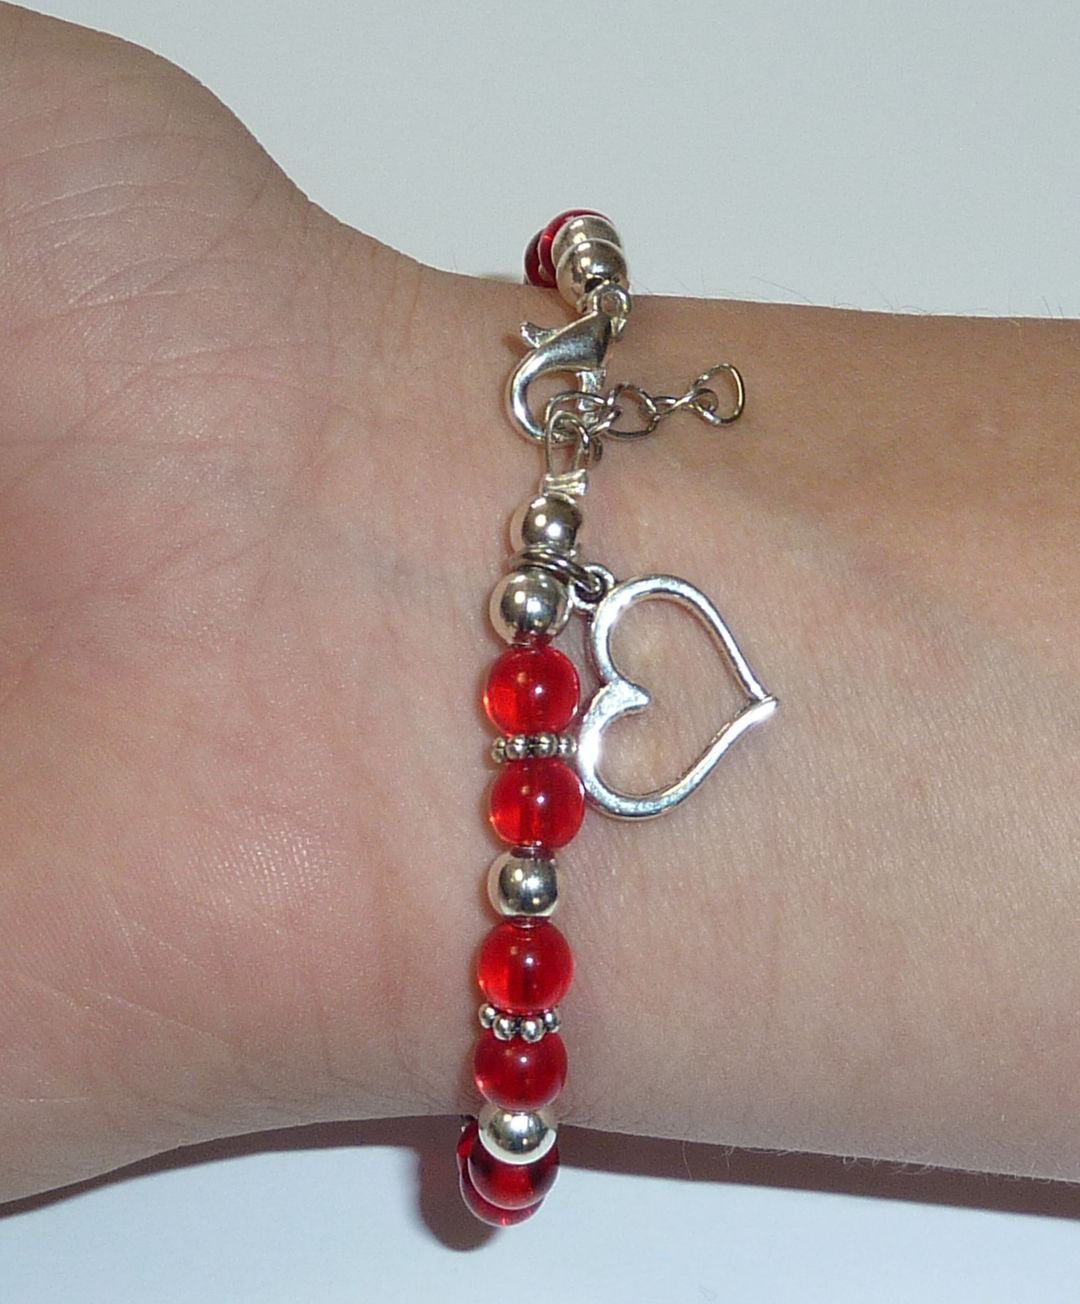 Heart Disease Awareness Beaded Women's Wire & Clasp Red Heart Bracelet, One Size fits Most, Comes Packaged. Wear to Show Support or Fundraising.…